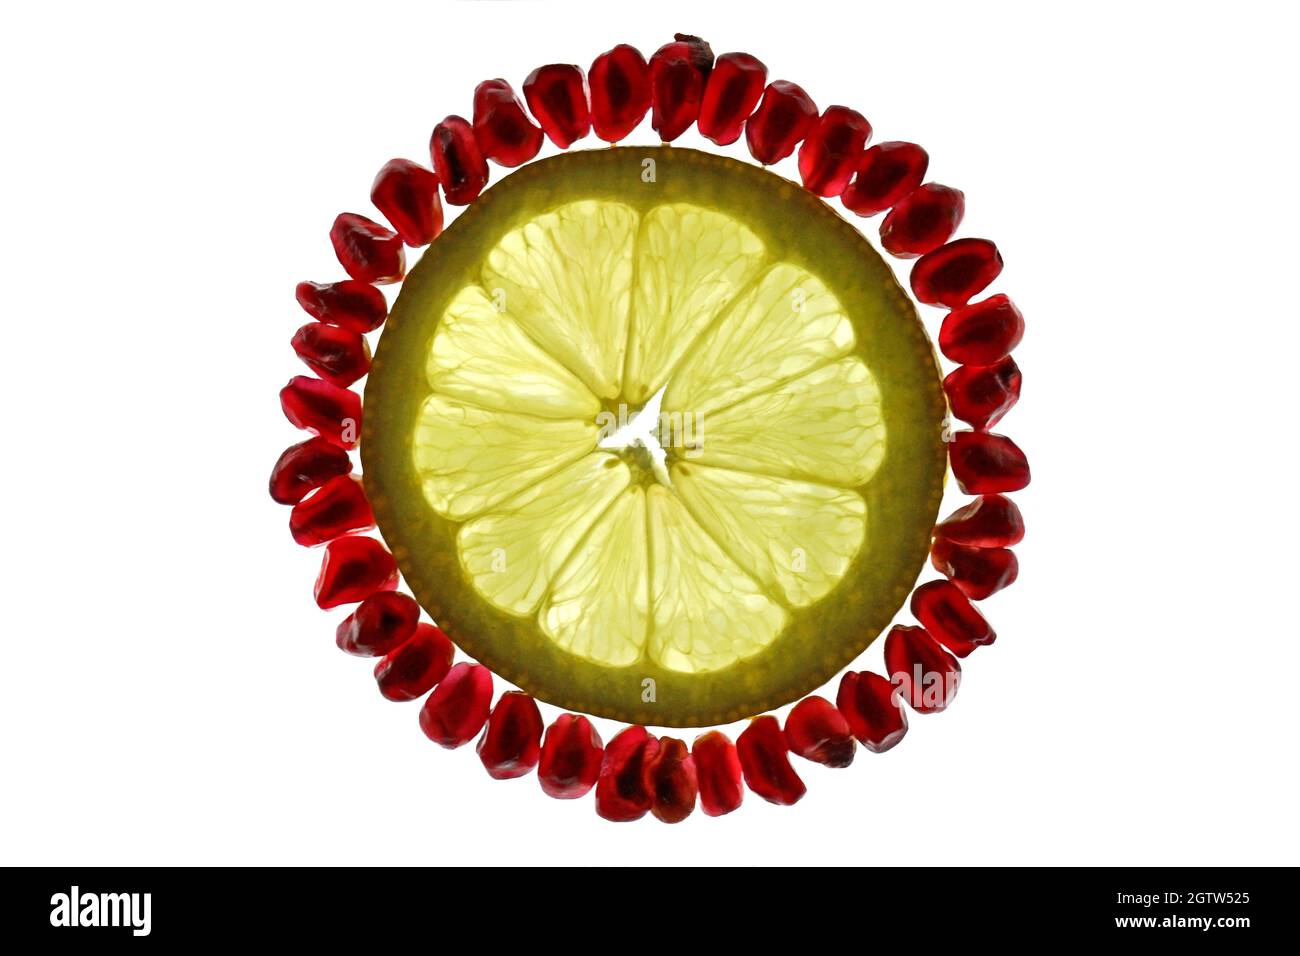 High Angle View Of Pomegranate And Lemon Over White Background Stock Photo